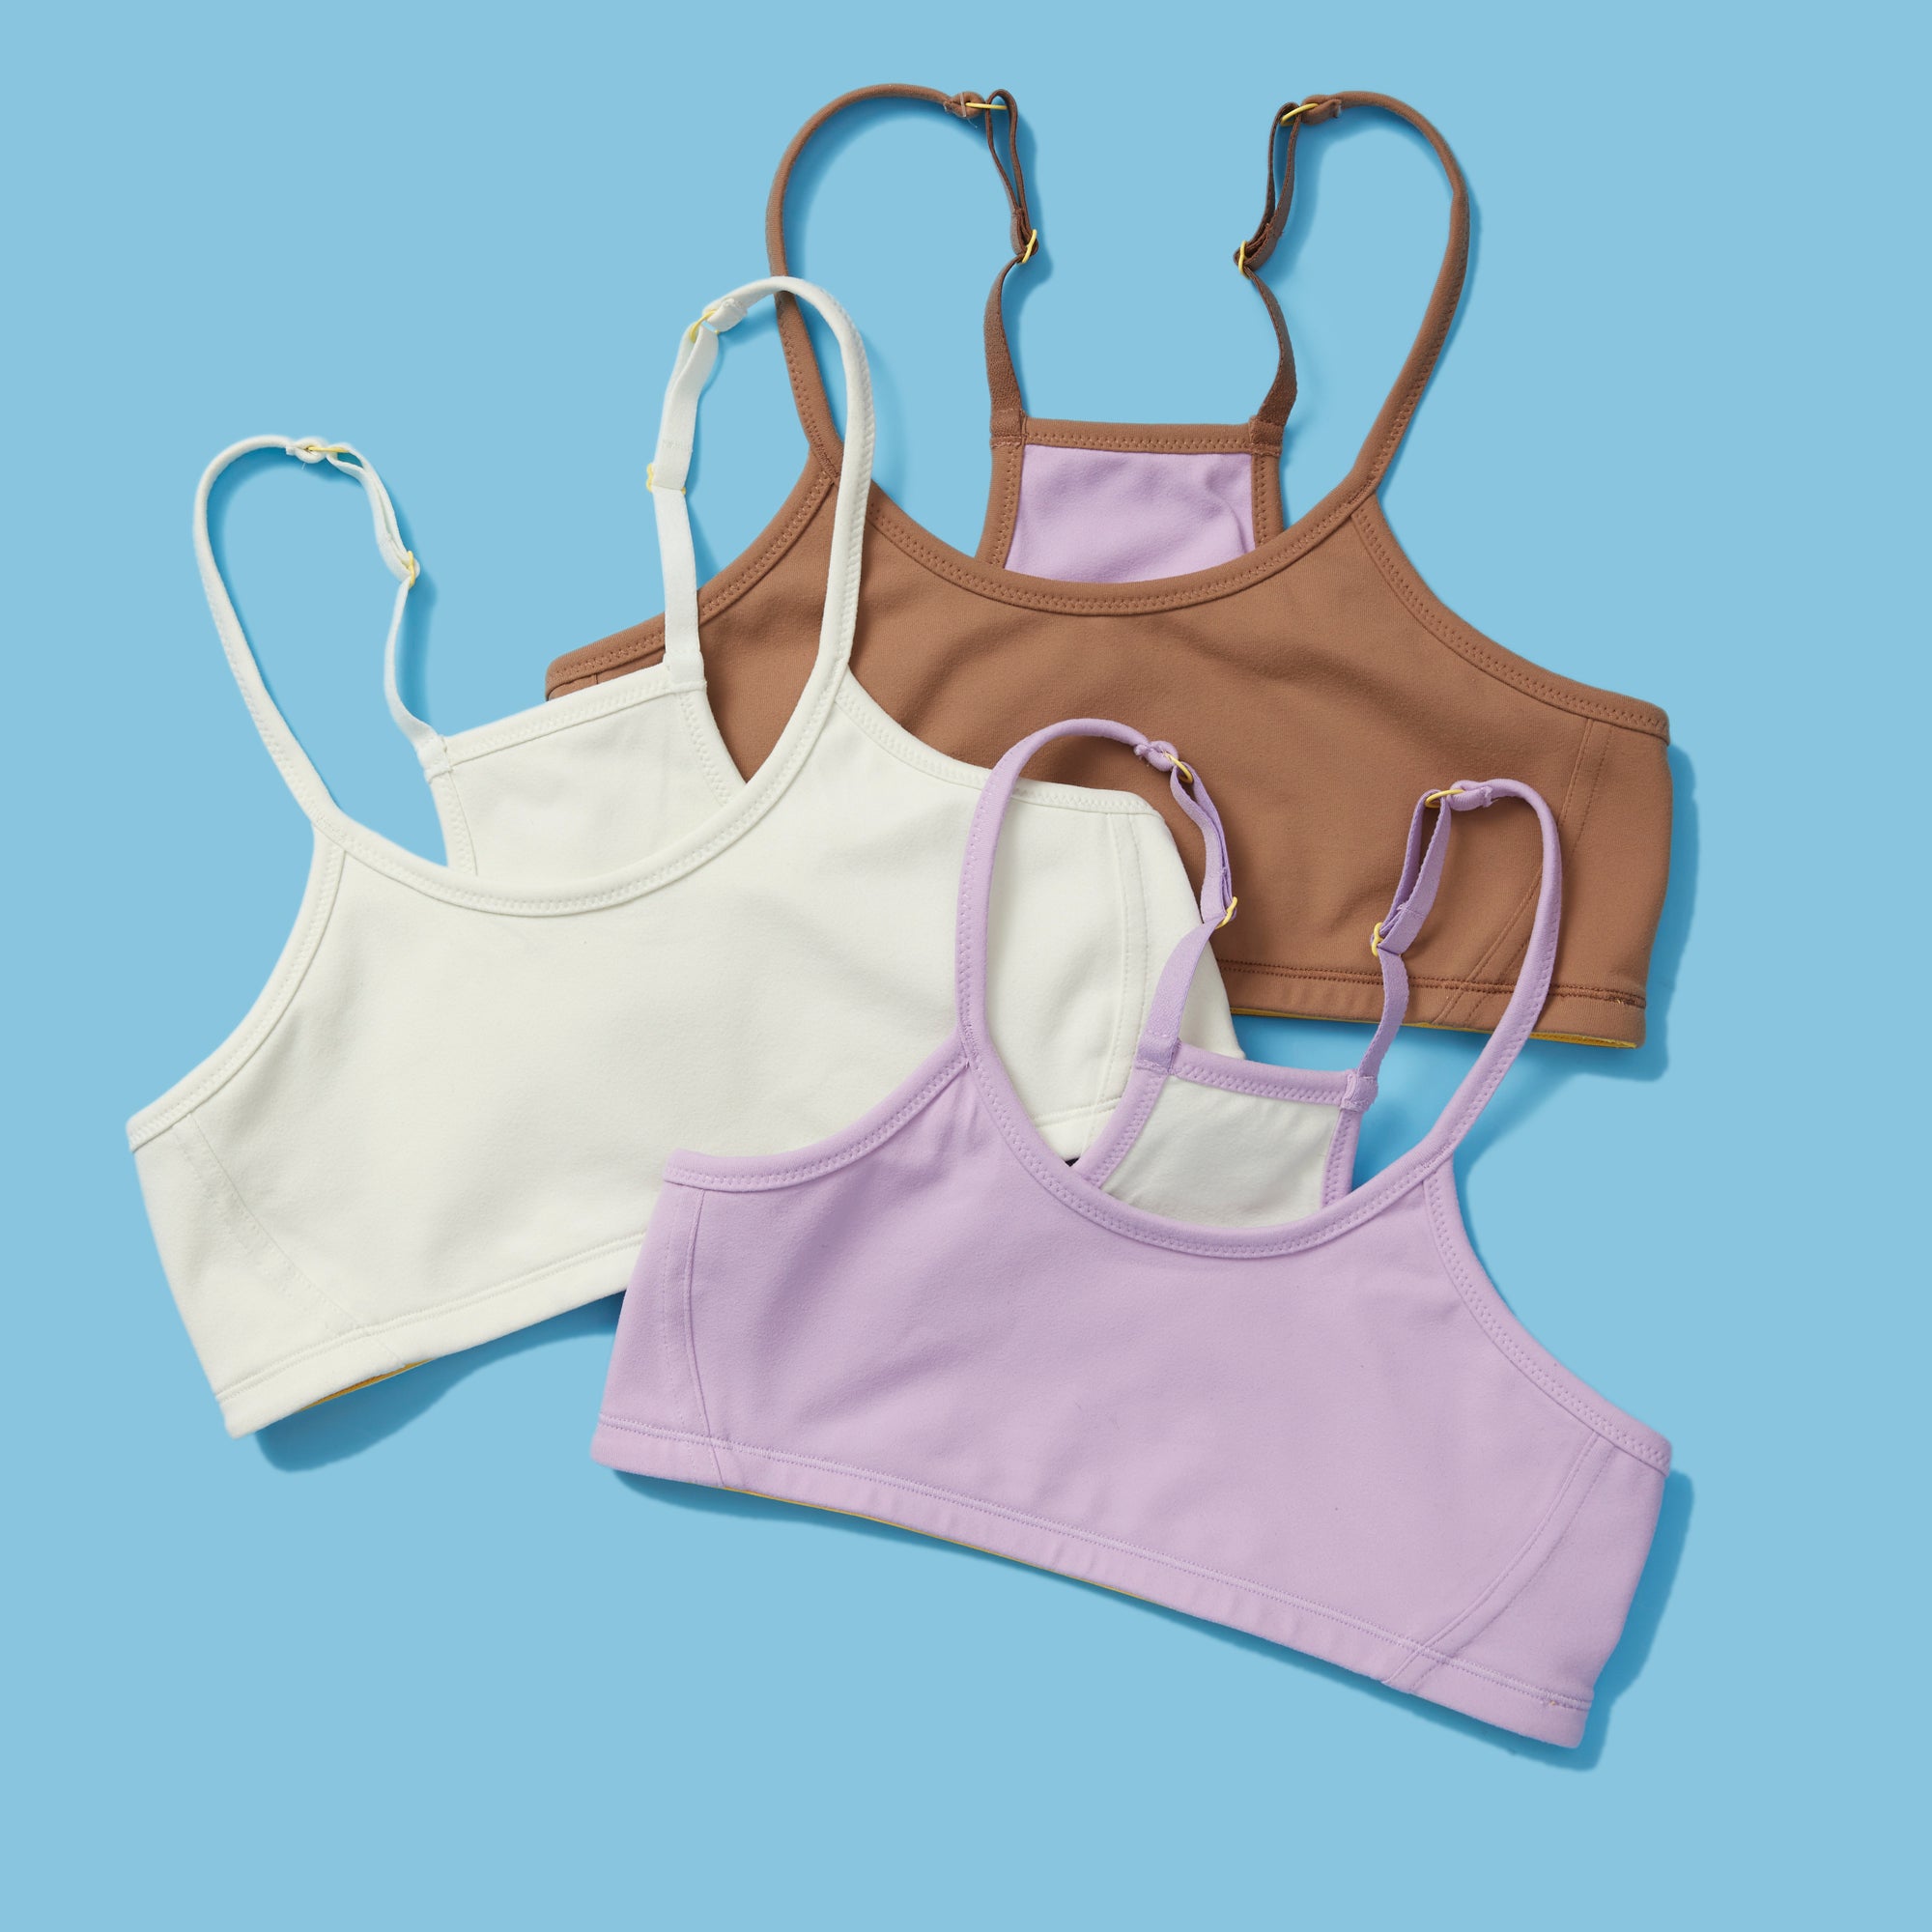 What Are the Benefits of Wearing Organic Cotton Bras? Exploring the Benefits